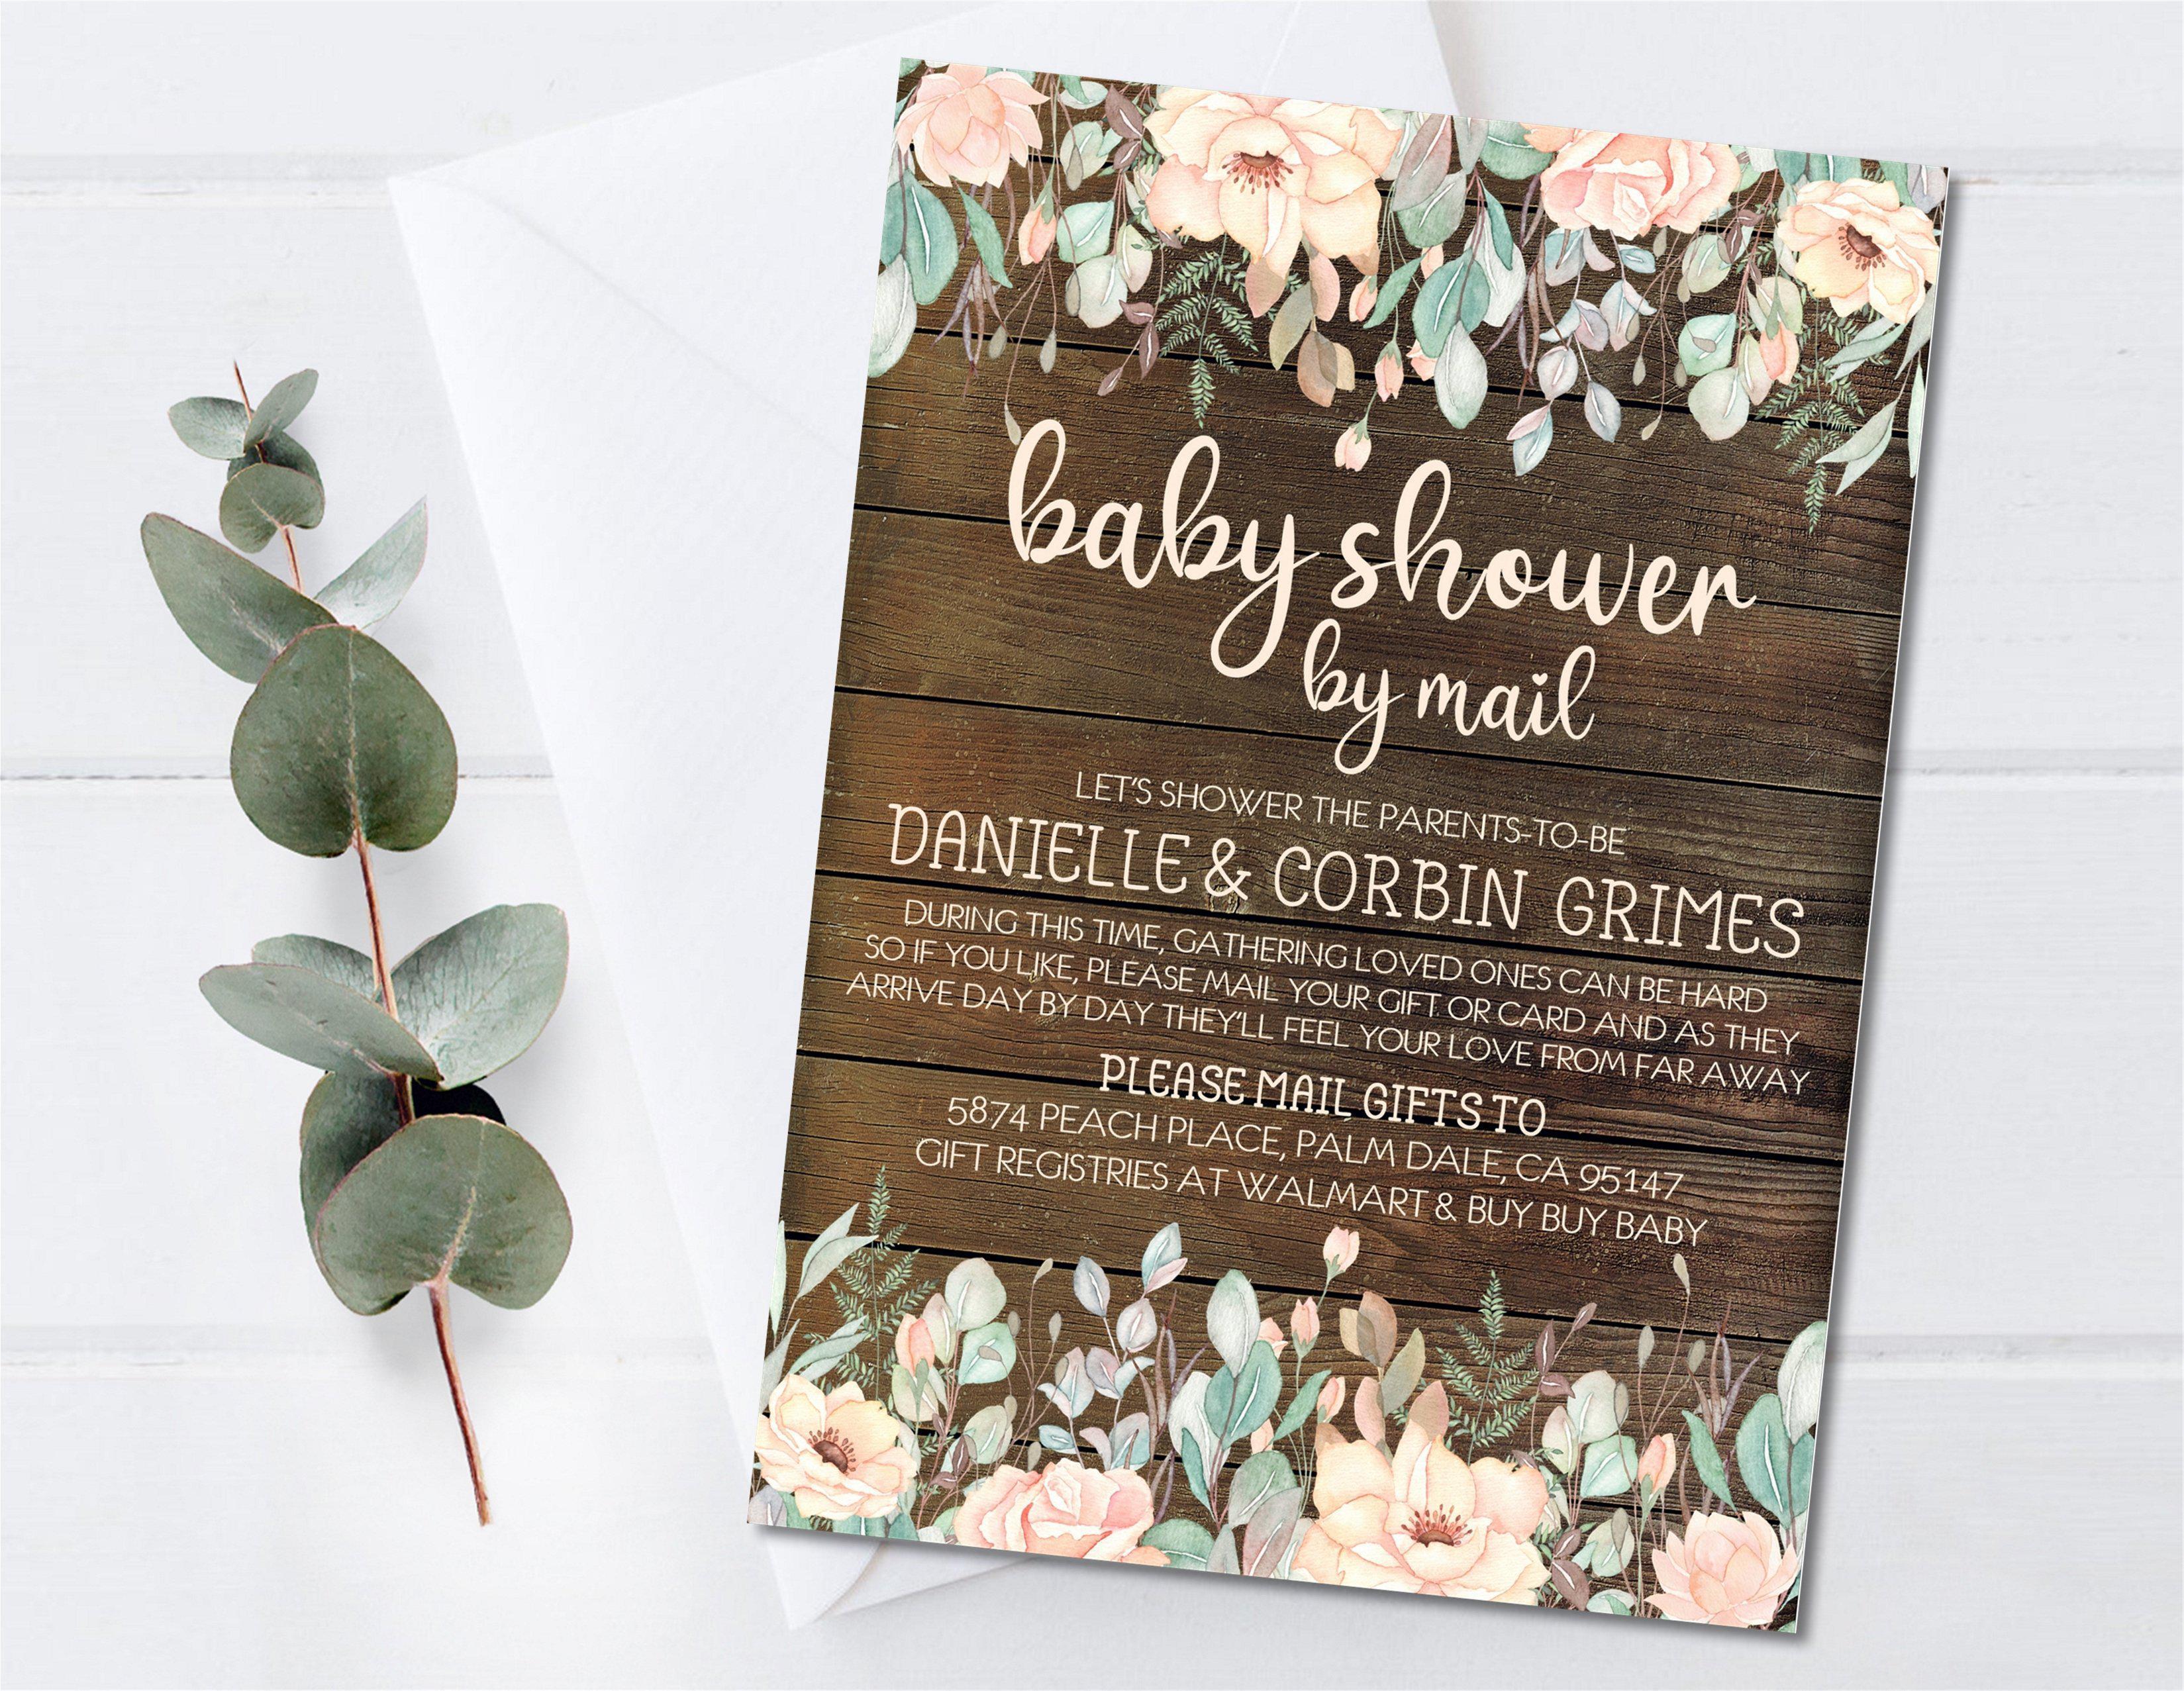 Girls Rustic Peach Baby Shower By Mail Invitations